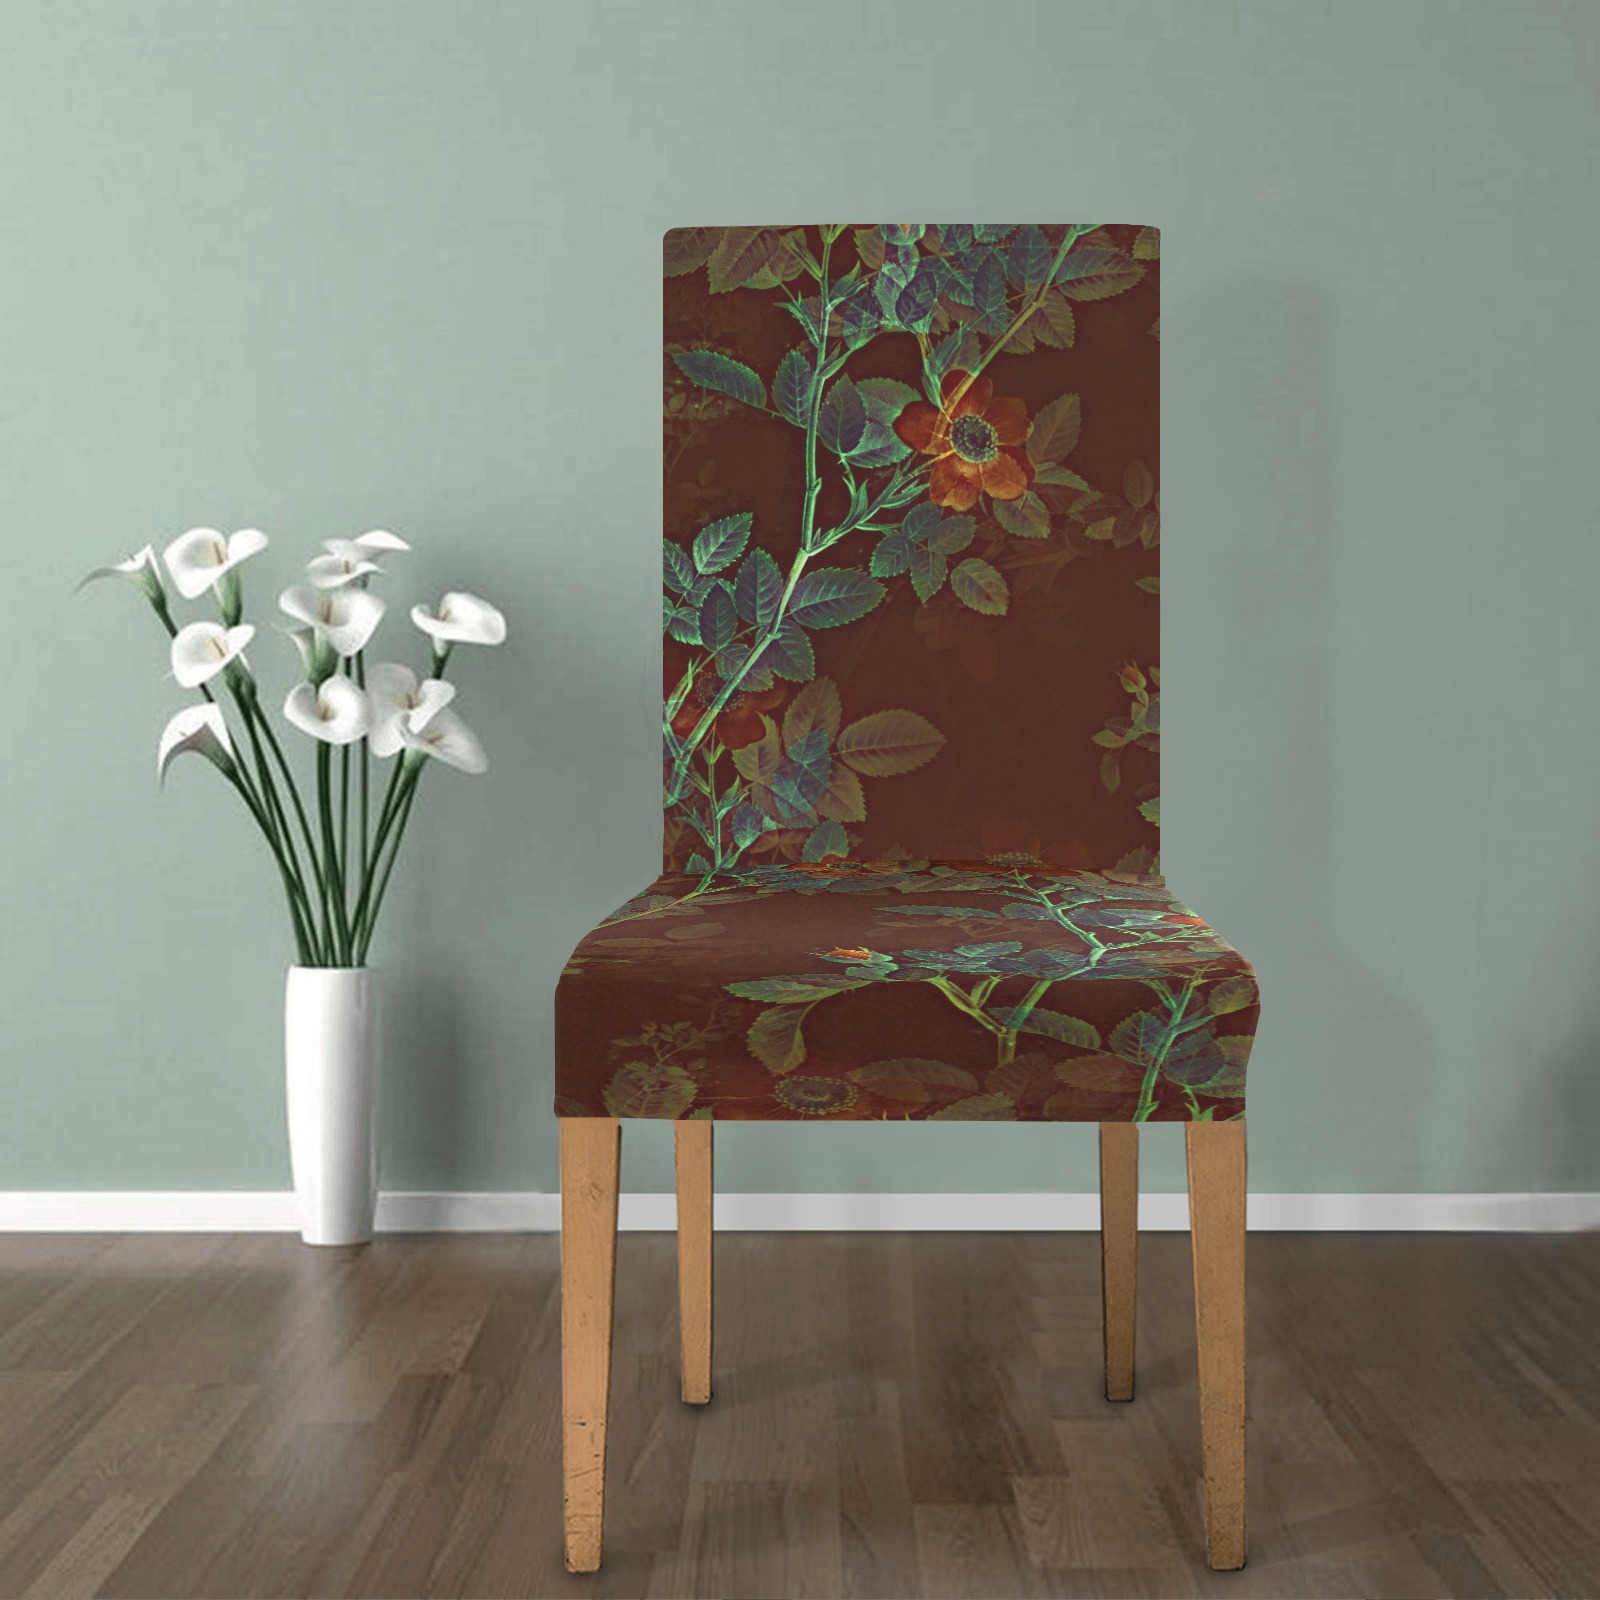 Copper Floral Removable Dining Chair Cover